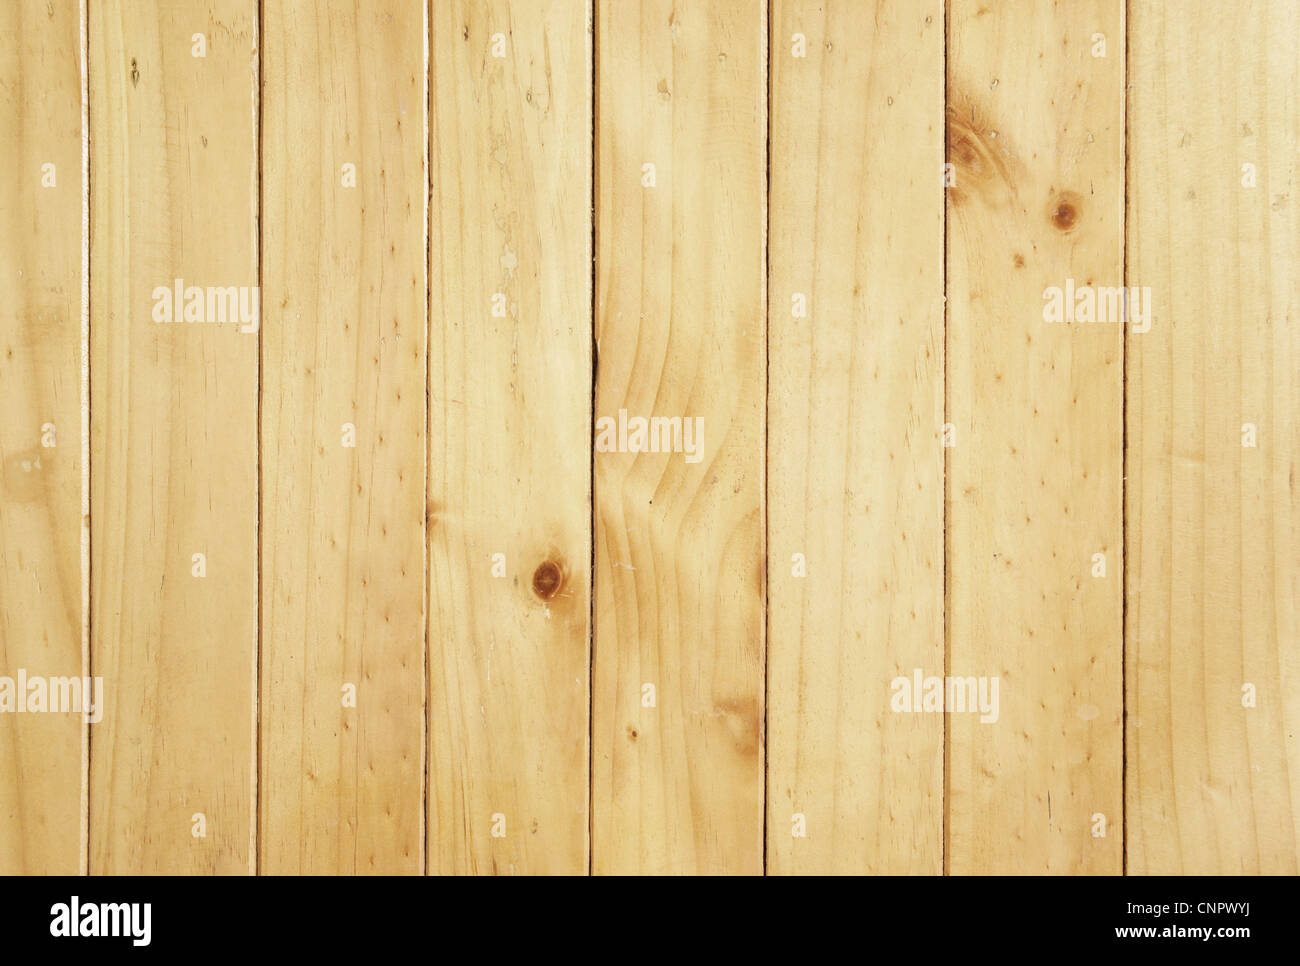 yellow wood material for background Stock Photo